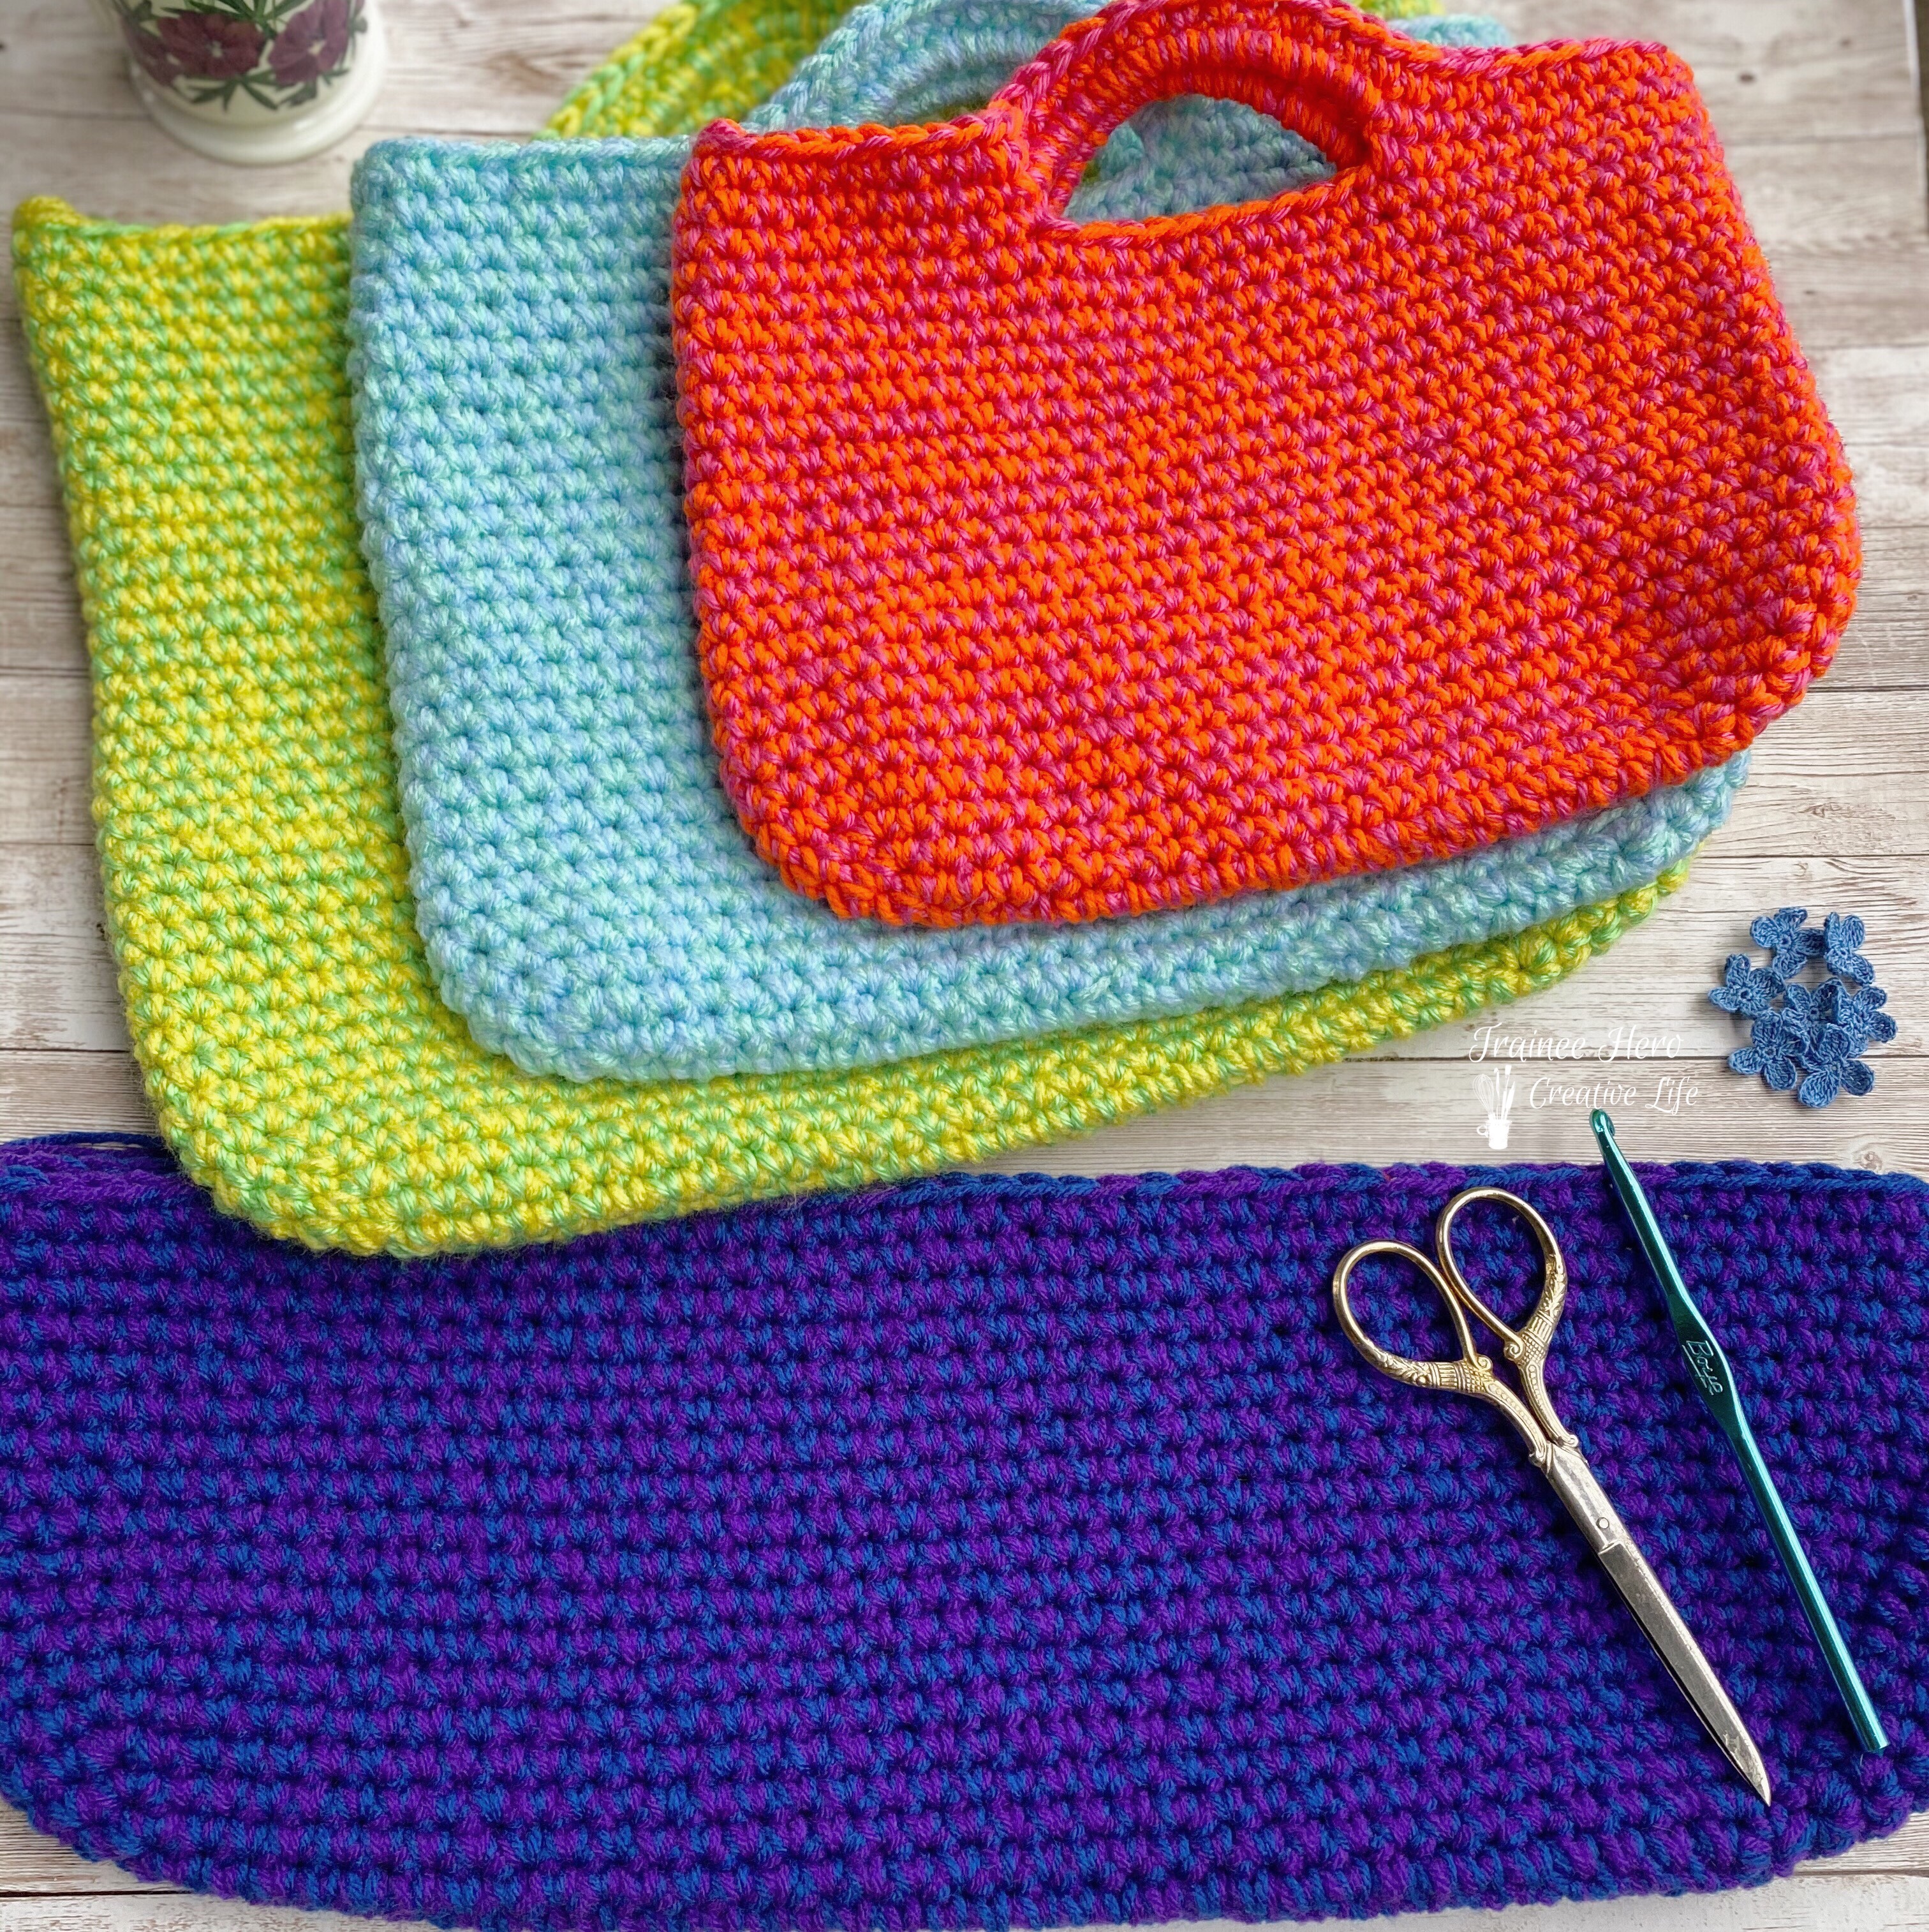 Three finished crocheted bags and one crochet bag in progress.